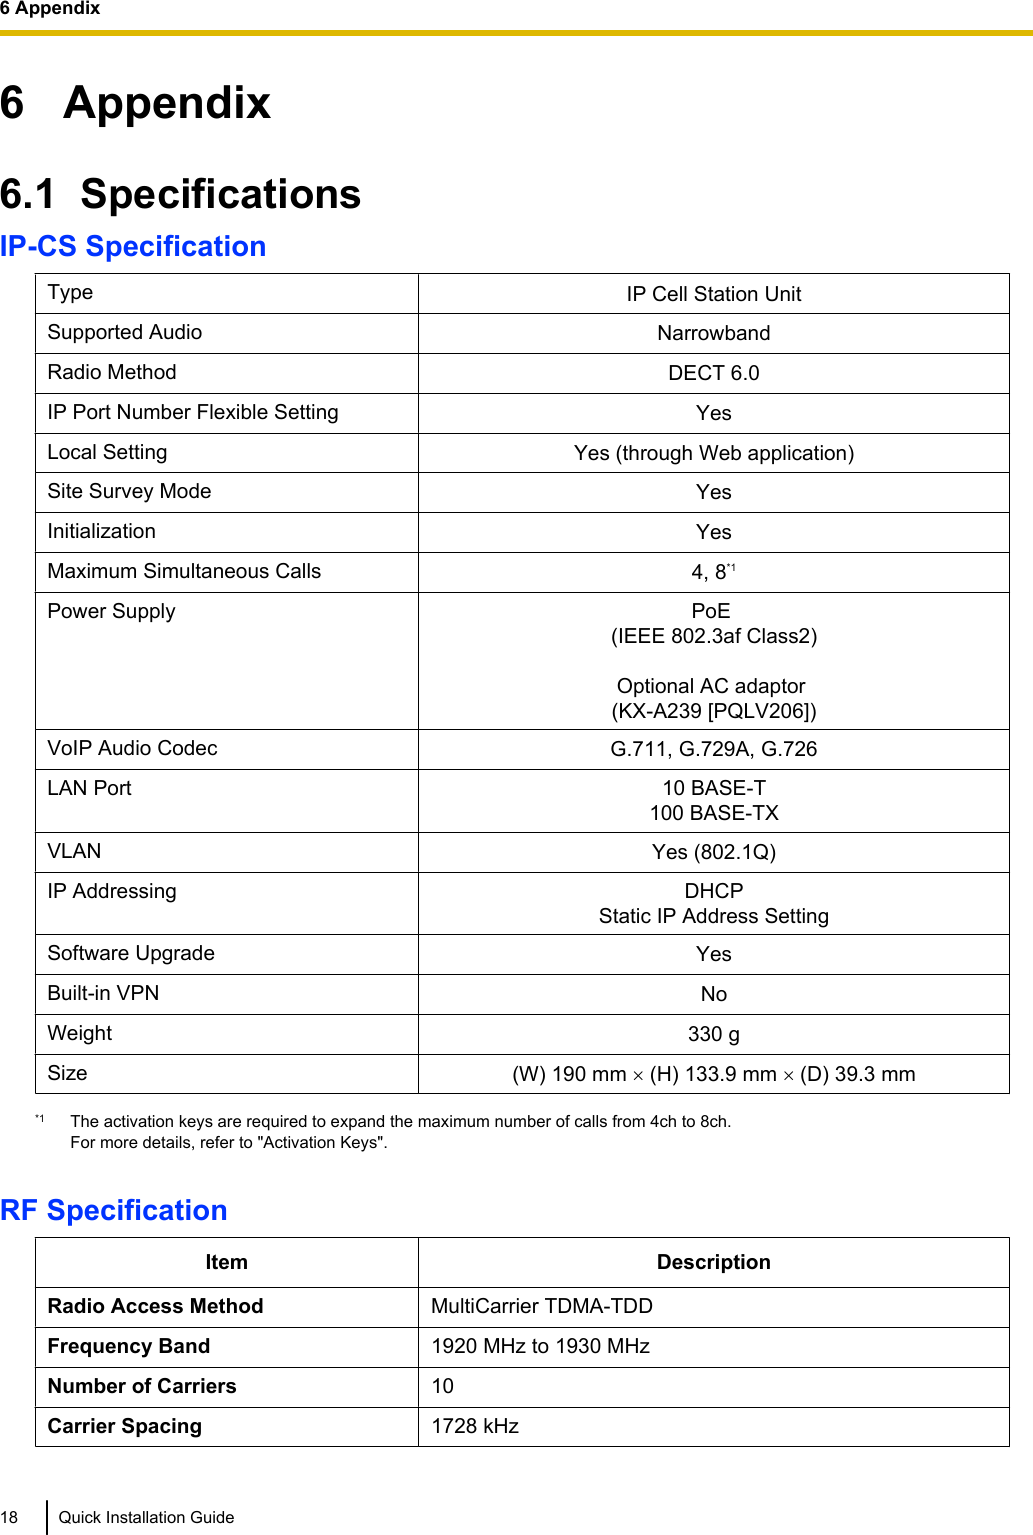 6   Appendix6.1  SpecificationsIP-CS SpecificationType IP Cell Station UnitSupported Audio NarrowbandRadio Method DECT 6.0IP Port Number Flexible Setting YesLocal Setting Yes (through Web application)Site Survey Mode YesInitialization YesMaximum Simultaneous Calls 4, 8*1Power Supply PoE (IEEE 802.3af Class2)Optional AC adaptor (KX-A239 [PQLV206])VoIP Audio Codec G.711, G.729A, G.726LAN Port 10 BASE-T100 BASE-TXVLAN Yes (802.1Q)IP Addressing DHCPStatic IP Address SettingSoftware Upgrade YesBuilt-in VPN NoWeight 330 gSize (W) 190 mm ´ (H) 133.9 mm ´ (D) 39.3 mm*1 The activation keys are required to expand the maximum number of calls from 4ch to 8ch.For more details, refer to &quot;Activation Keys&quot;.RF SpecificationItem DescriptionRadio Access Method MultiCarrier TDMA-TDDFrequency Band 1920 MHz to 1930 MHzNumber of Carriers 10Carrier Spacing 1728 kHz18 Quick Installation Guide6 Appendix